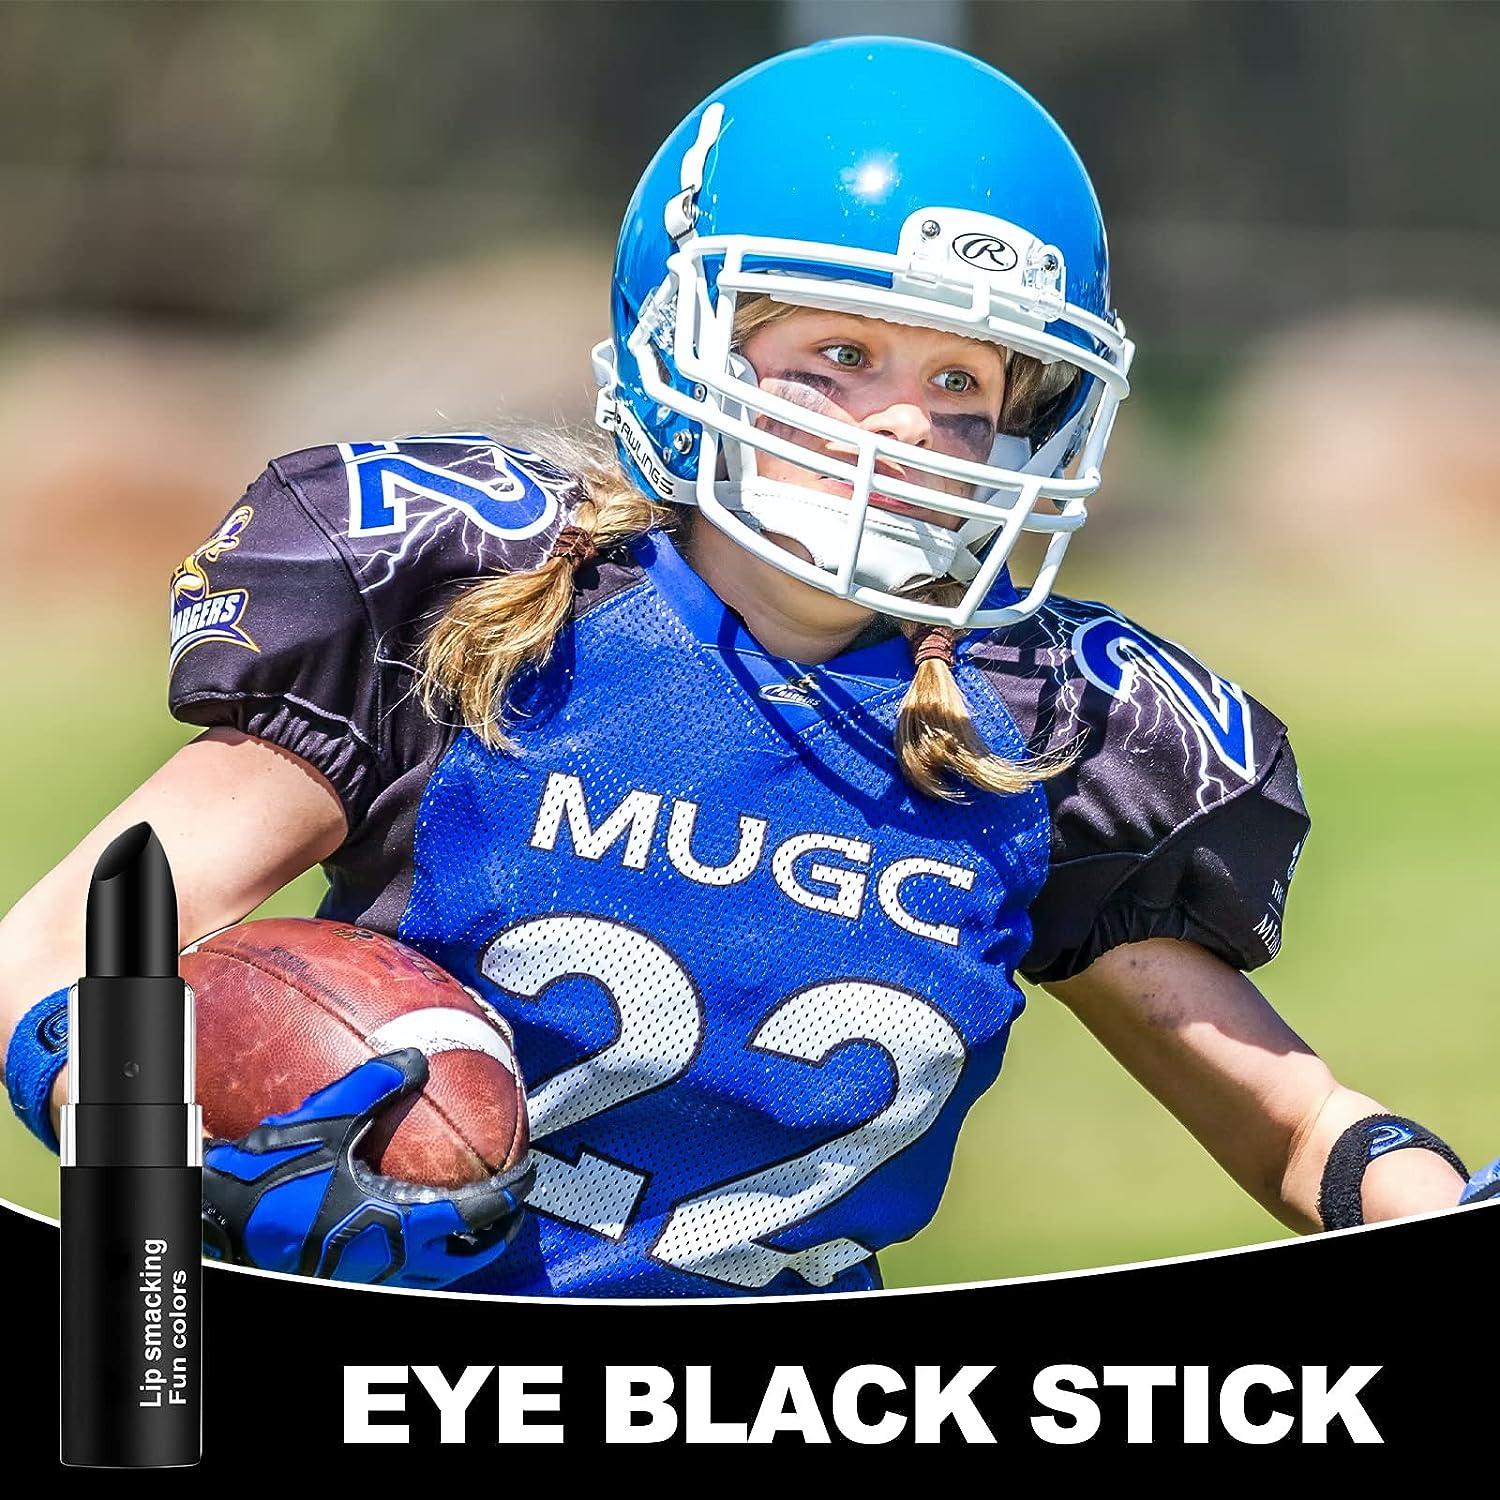 Eye Black Stick for Sports,Easy to Color Black Face Paint,Eye Black Football/Baseball/Softball,Football  Stick Baseball/Softball Accessories,Eye Black for Lip Smacking and Face  Painting 